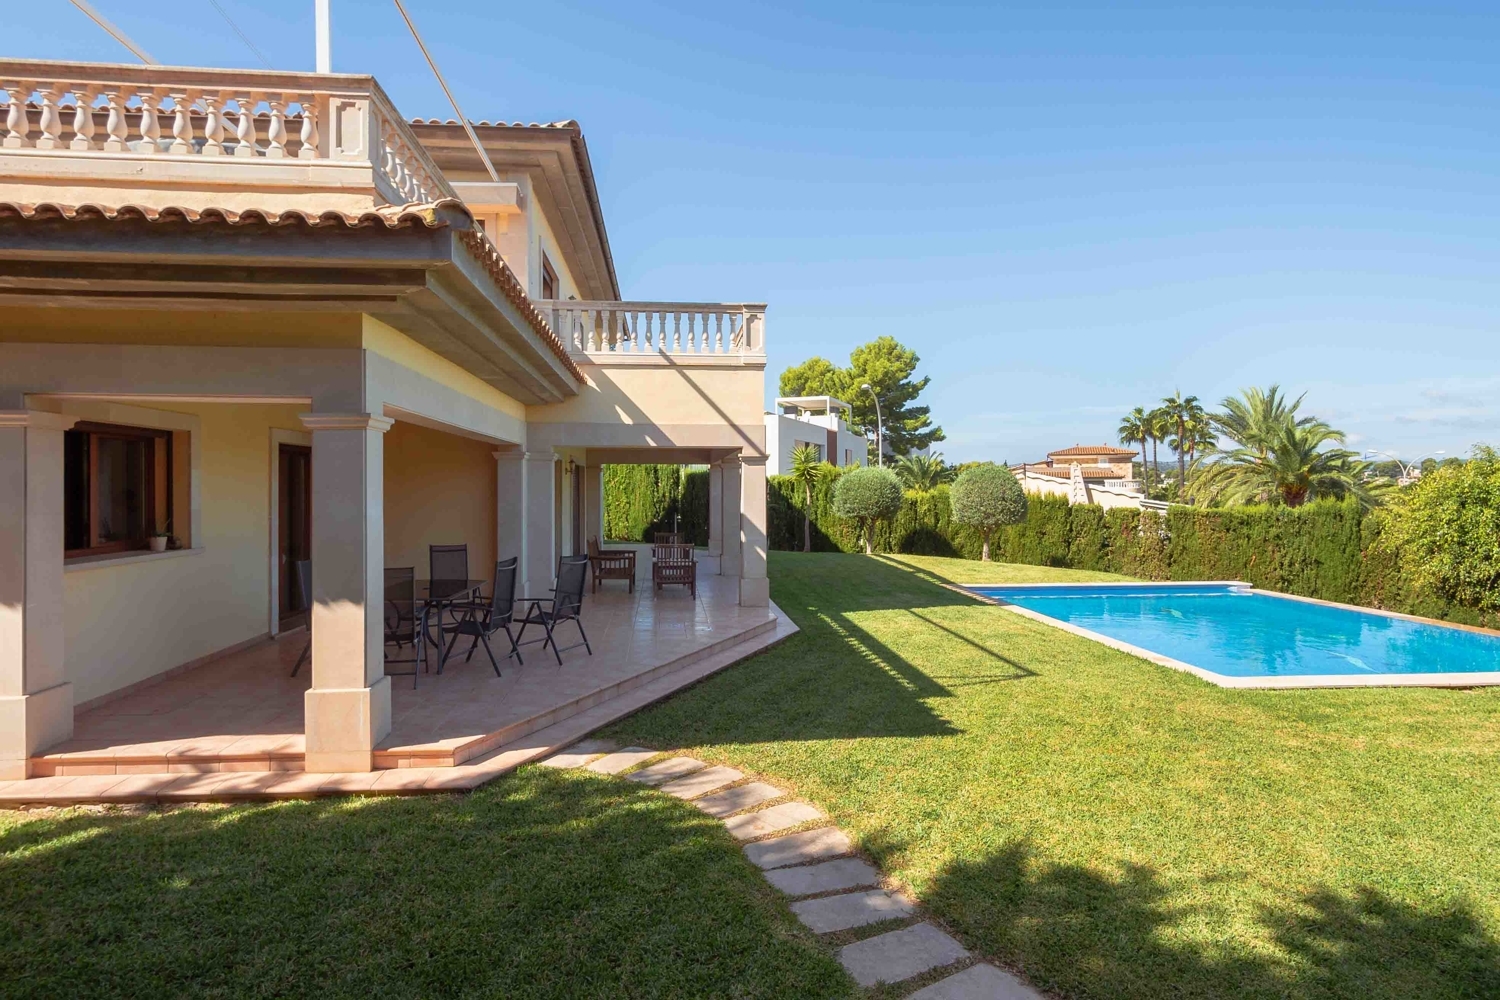 Charming VILLA wiith Infinity Pool and SEAVIEWS comes with a HOLIDAY RENTAL LICENSE in SANTA PONSA